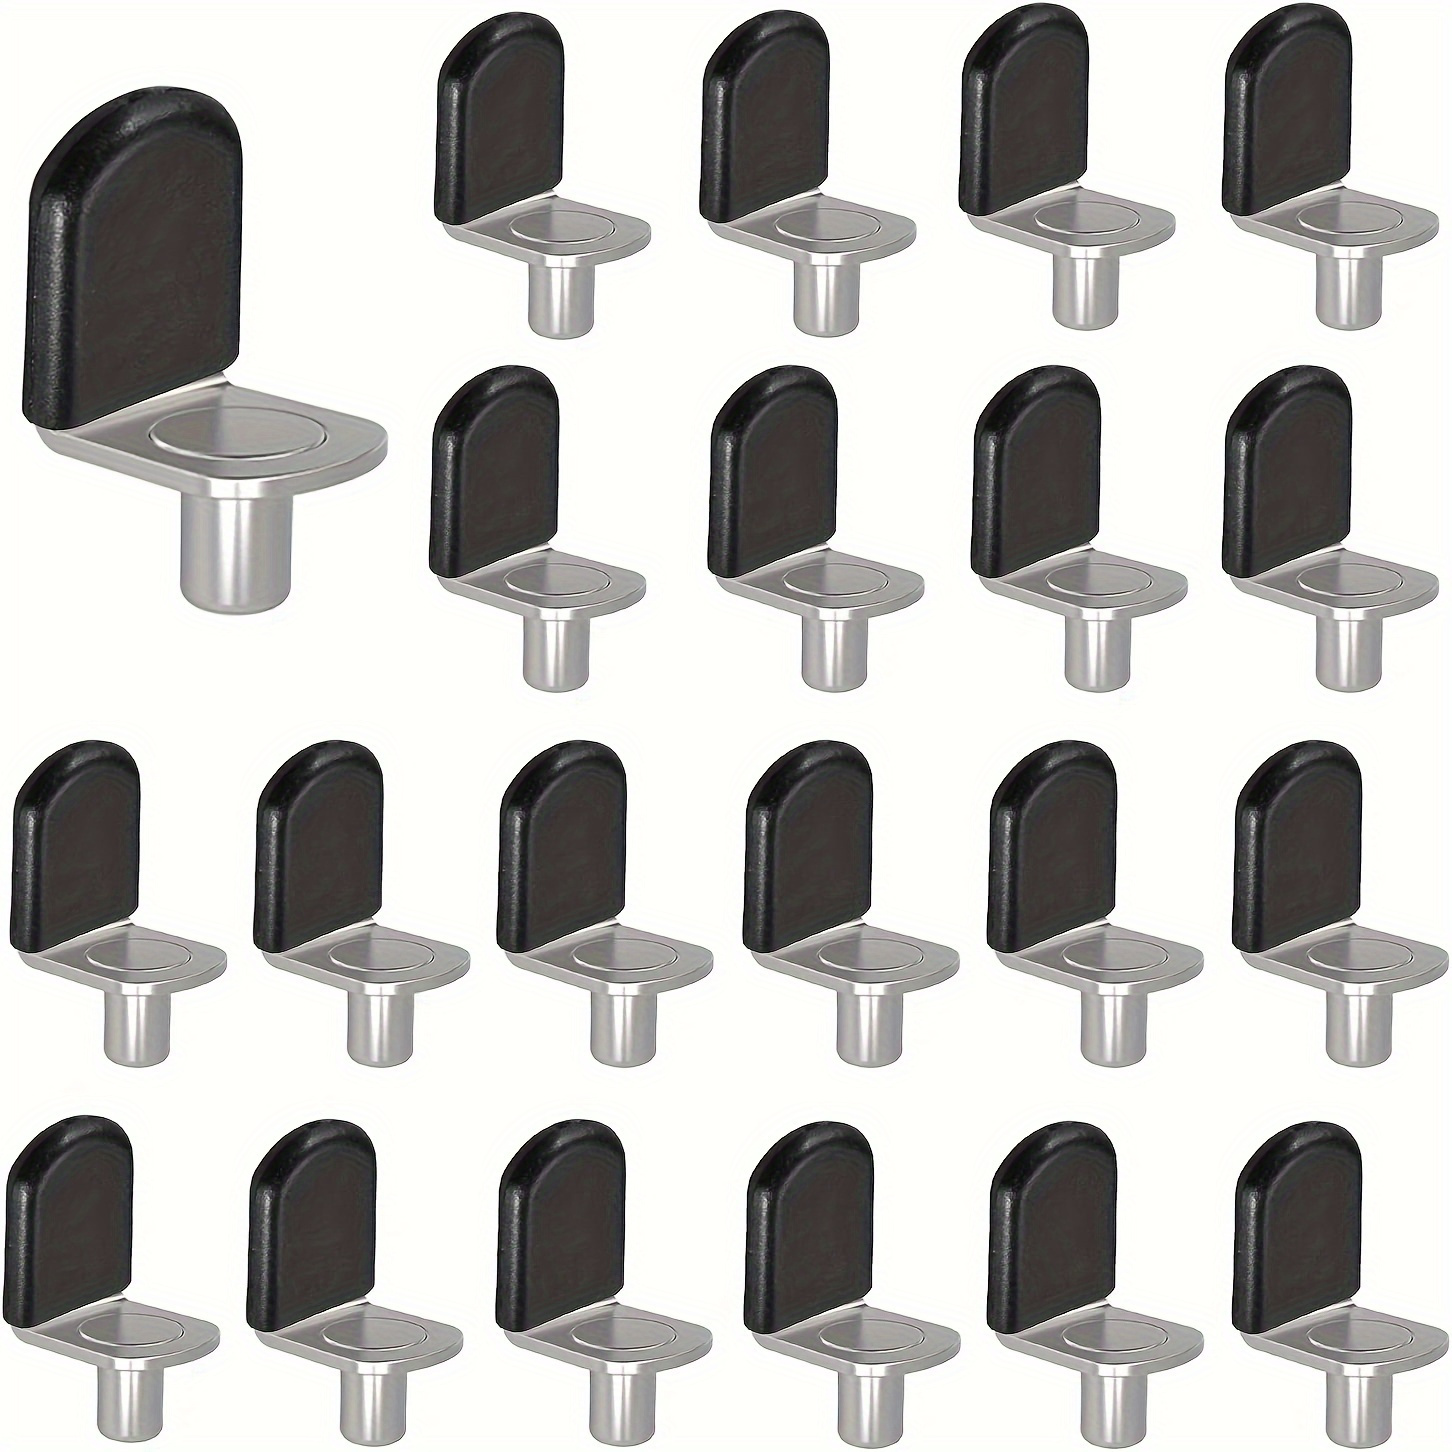  120 Pcs Shelf Pins 5mm Shelf Holder Support Pins Made from  Nickel Plated Metal Material Shelf Pegs are Sturdy and Durable for  Furniture Shelves Bracket. : Tools & Home Improvement